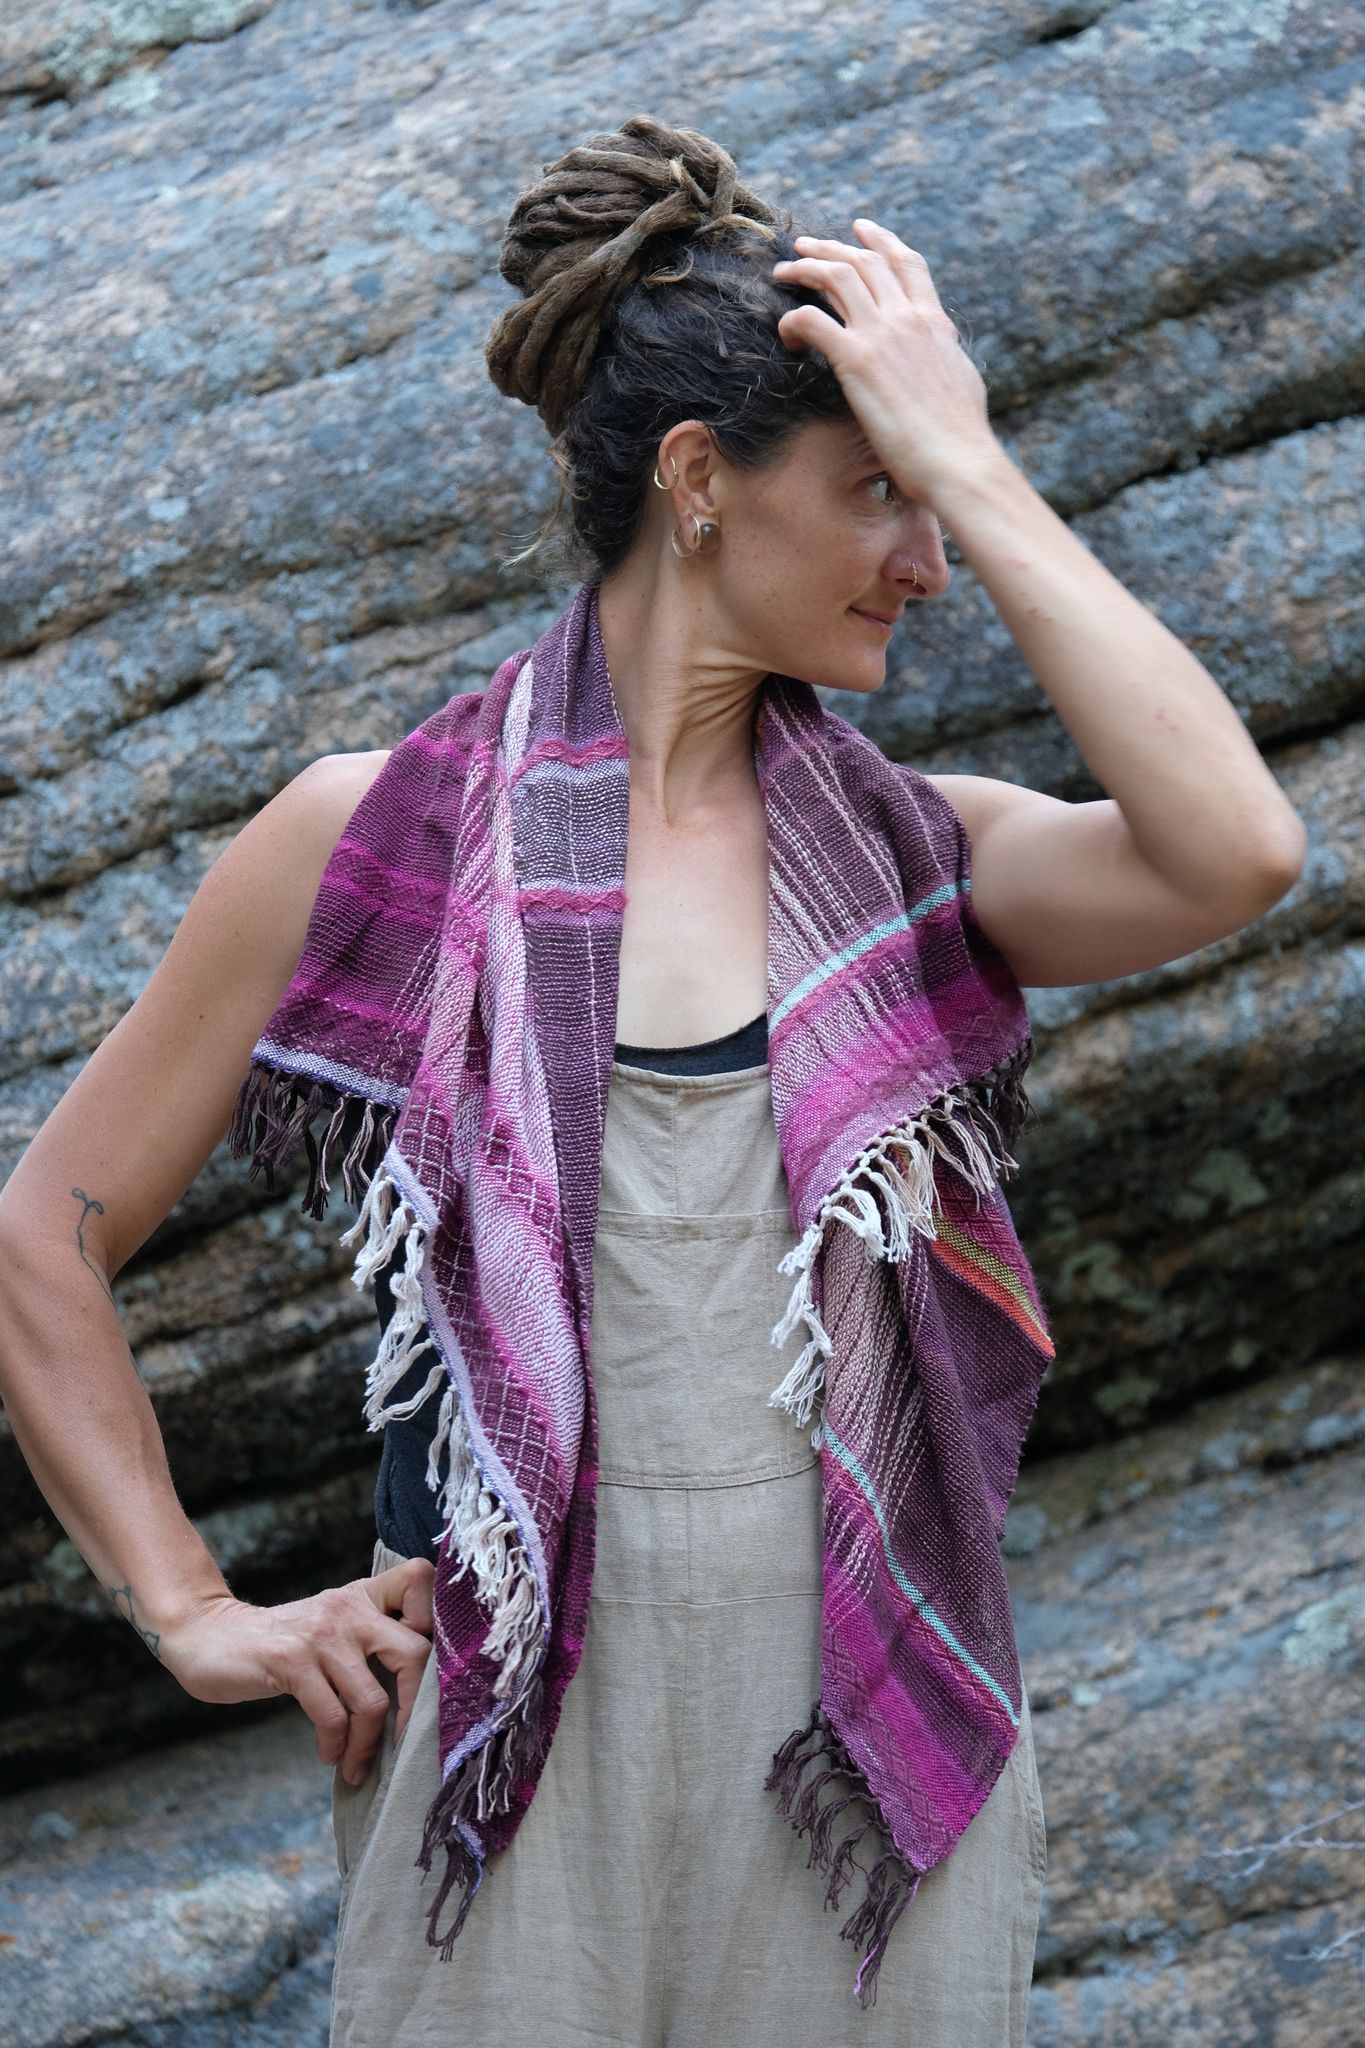 Woman wearing brown overalls and handwoven raspberry pink, brown and white scarf standing in front of a boulder